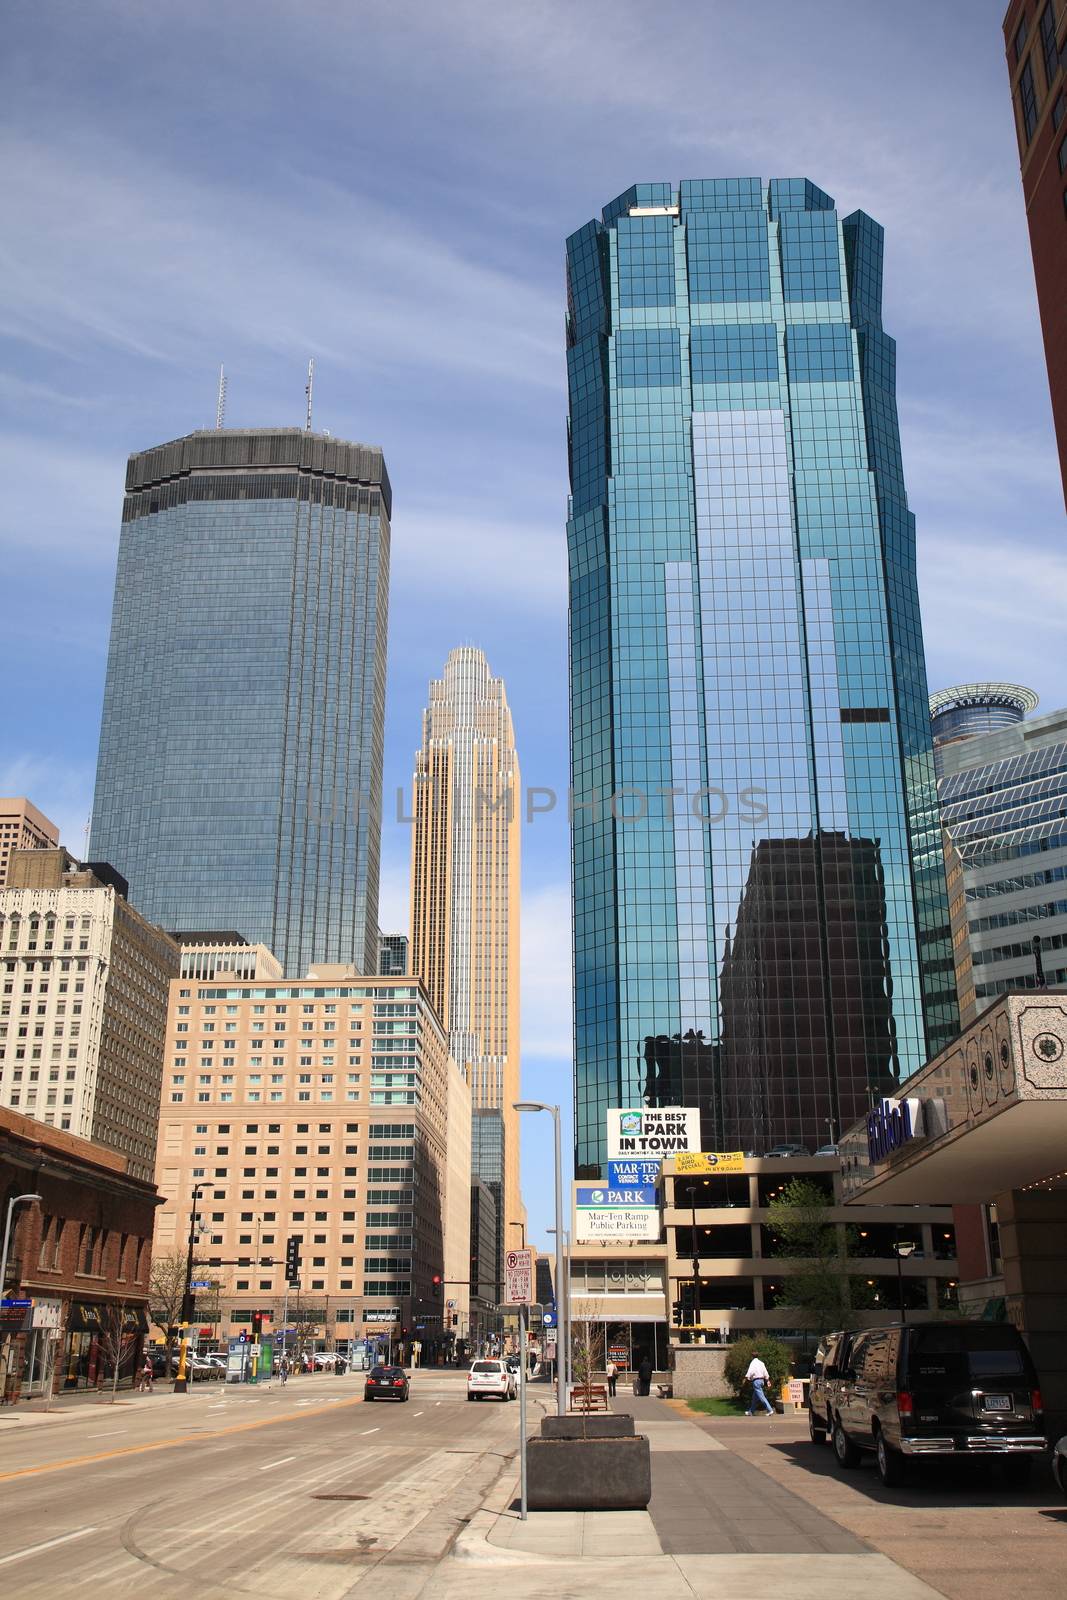 Downtown Minneapolis buildings and pedestrians.